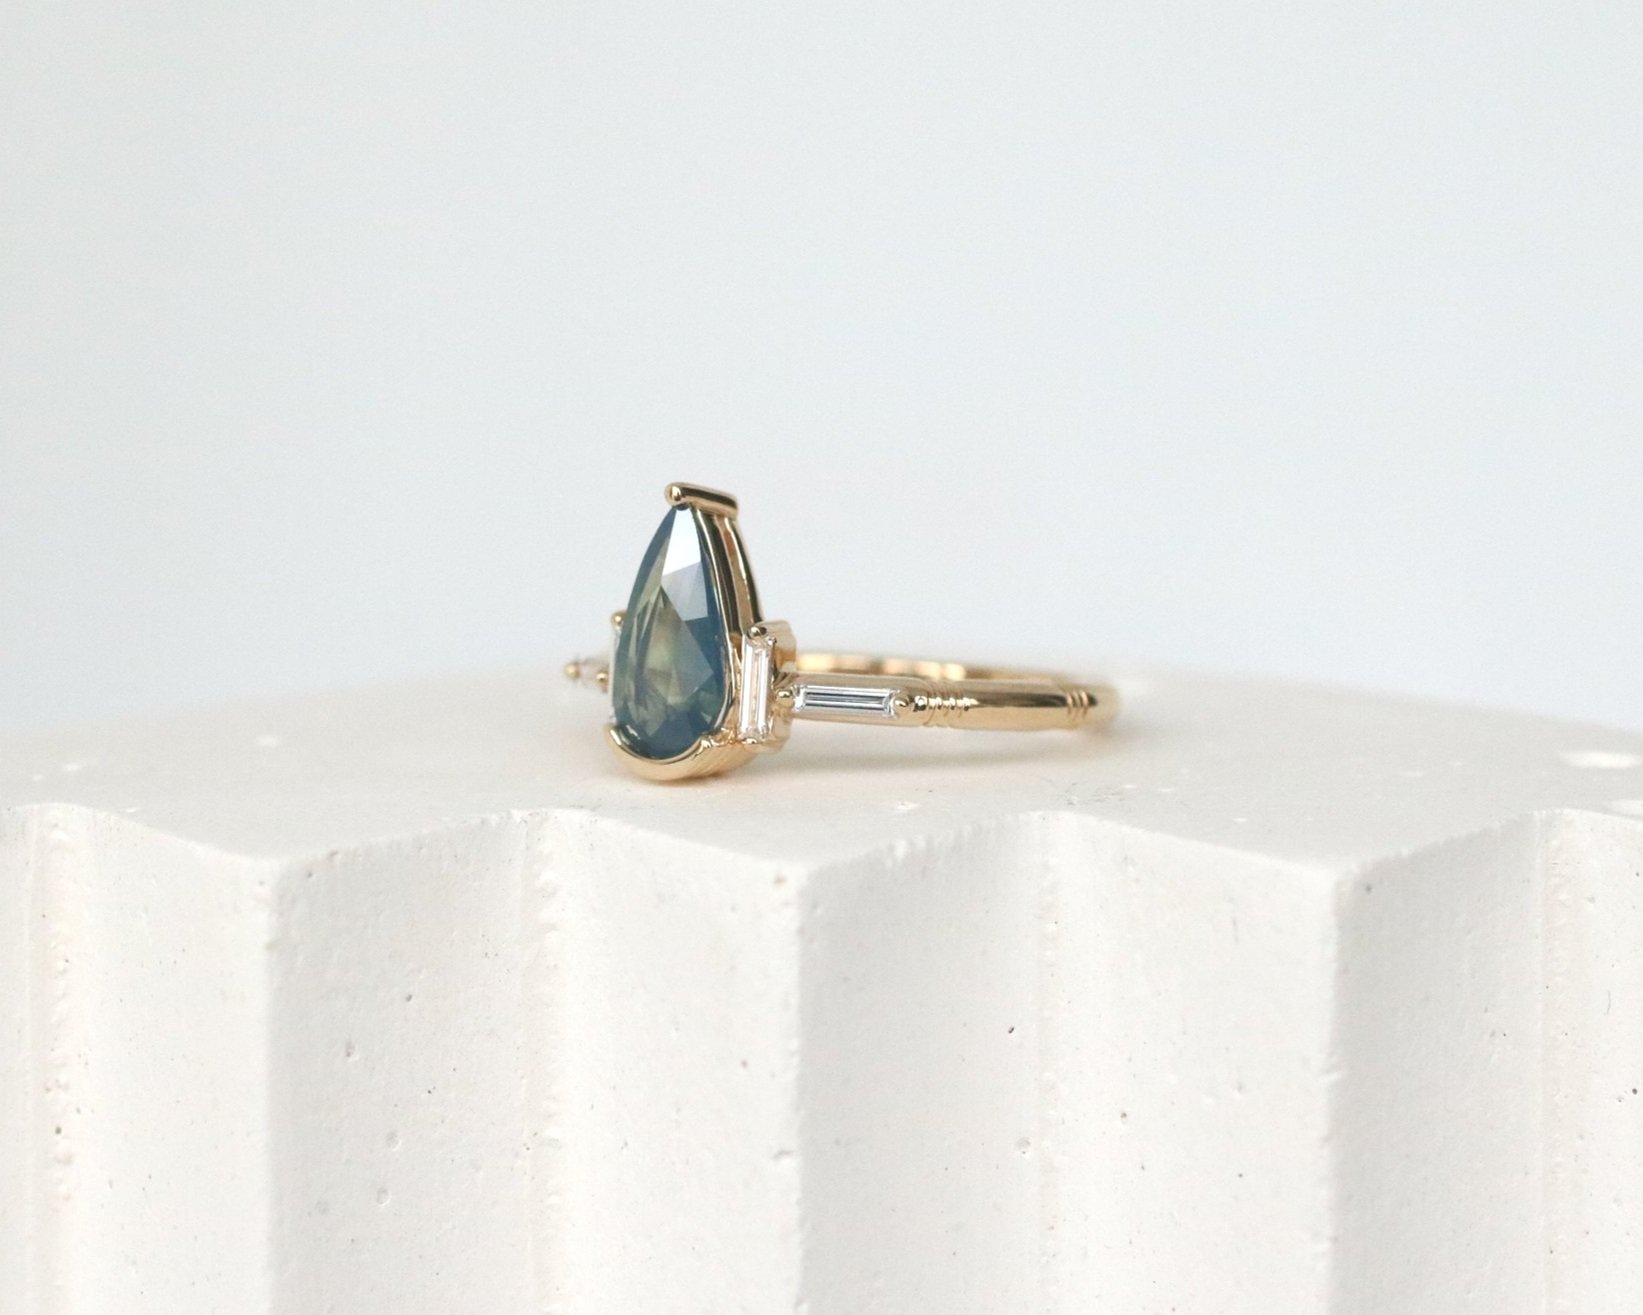 NIA ENGAGEMENT RING - BLUE PEAR SAPPHIRE + LAB DIAMOND BAGUETTES + 14K YELLOW GOLD